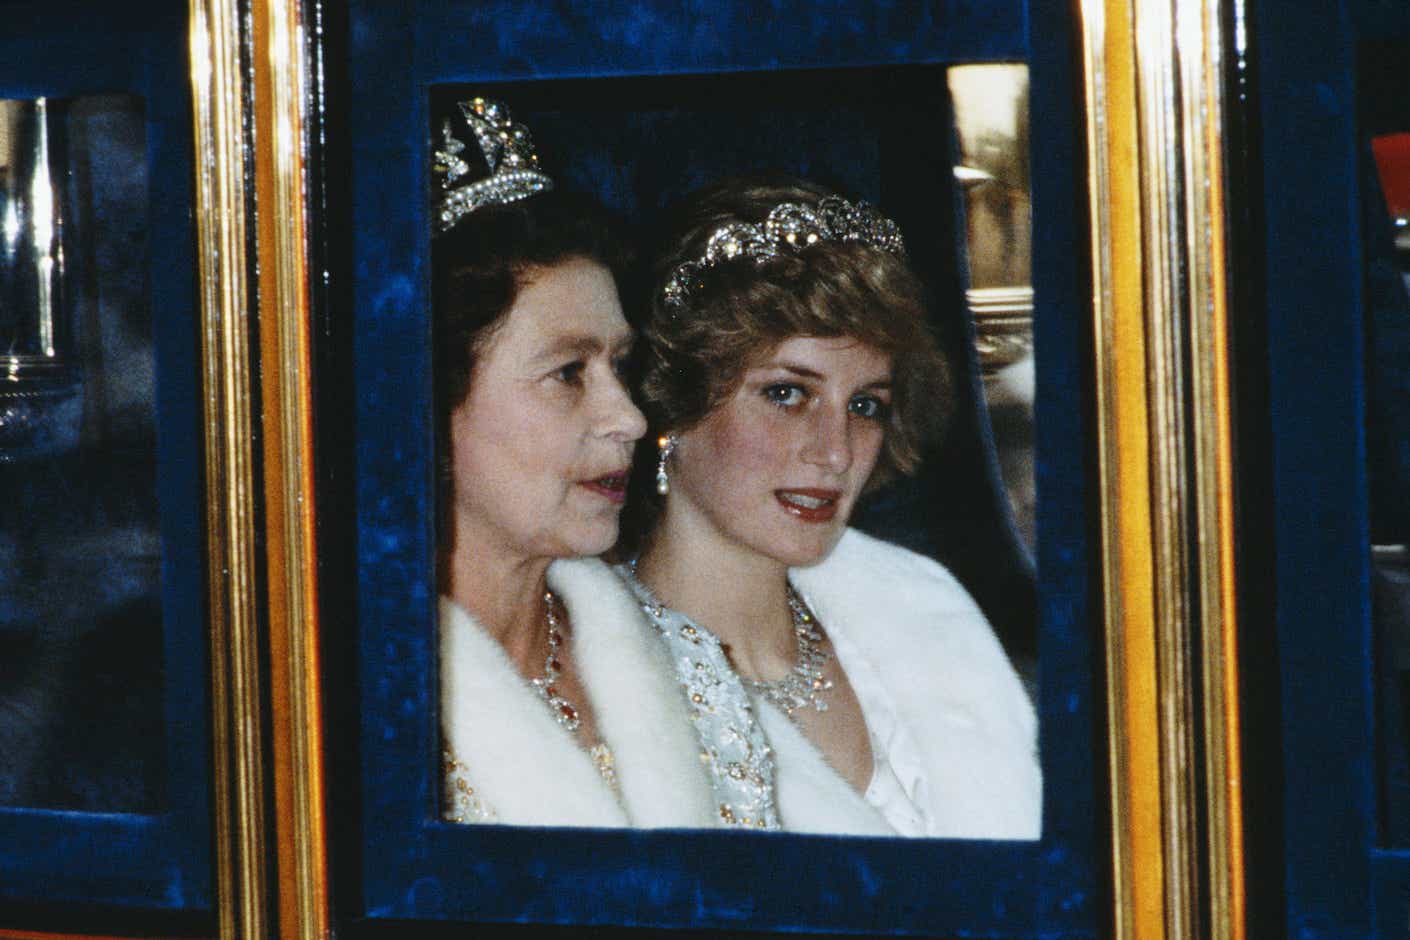 The Princess of Wales and the Queen attend the Opening of Parliament in 1982, both wearing jewels and furs.